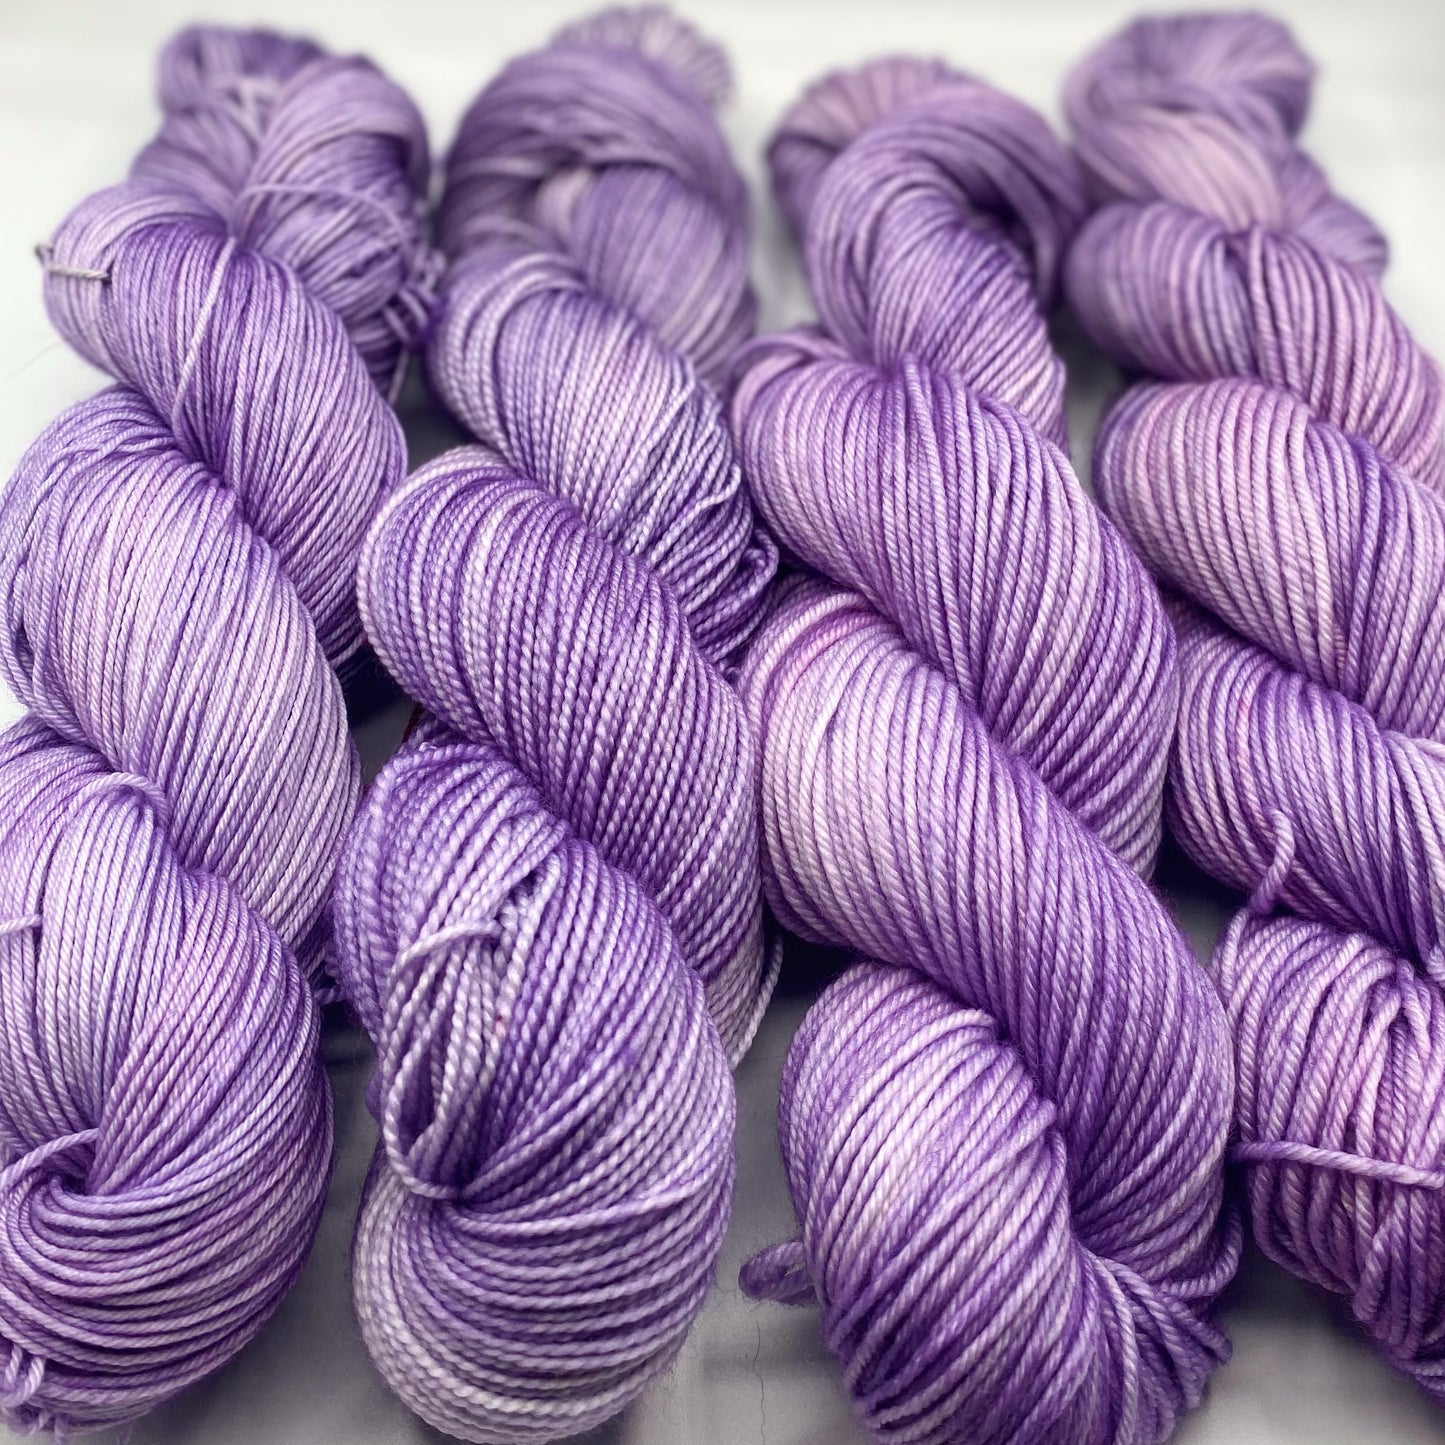 Dyed to Order - Wildflower